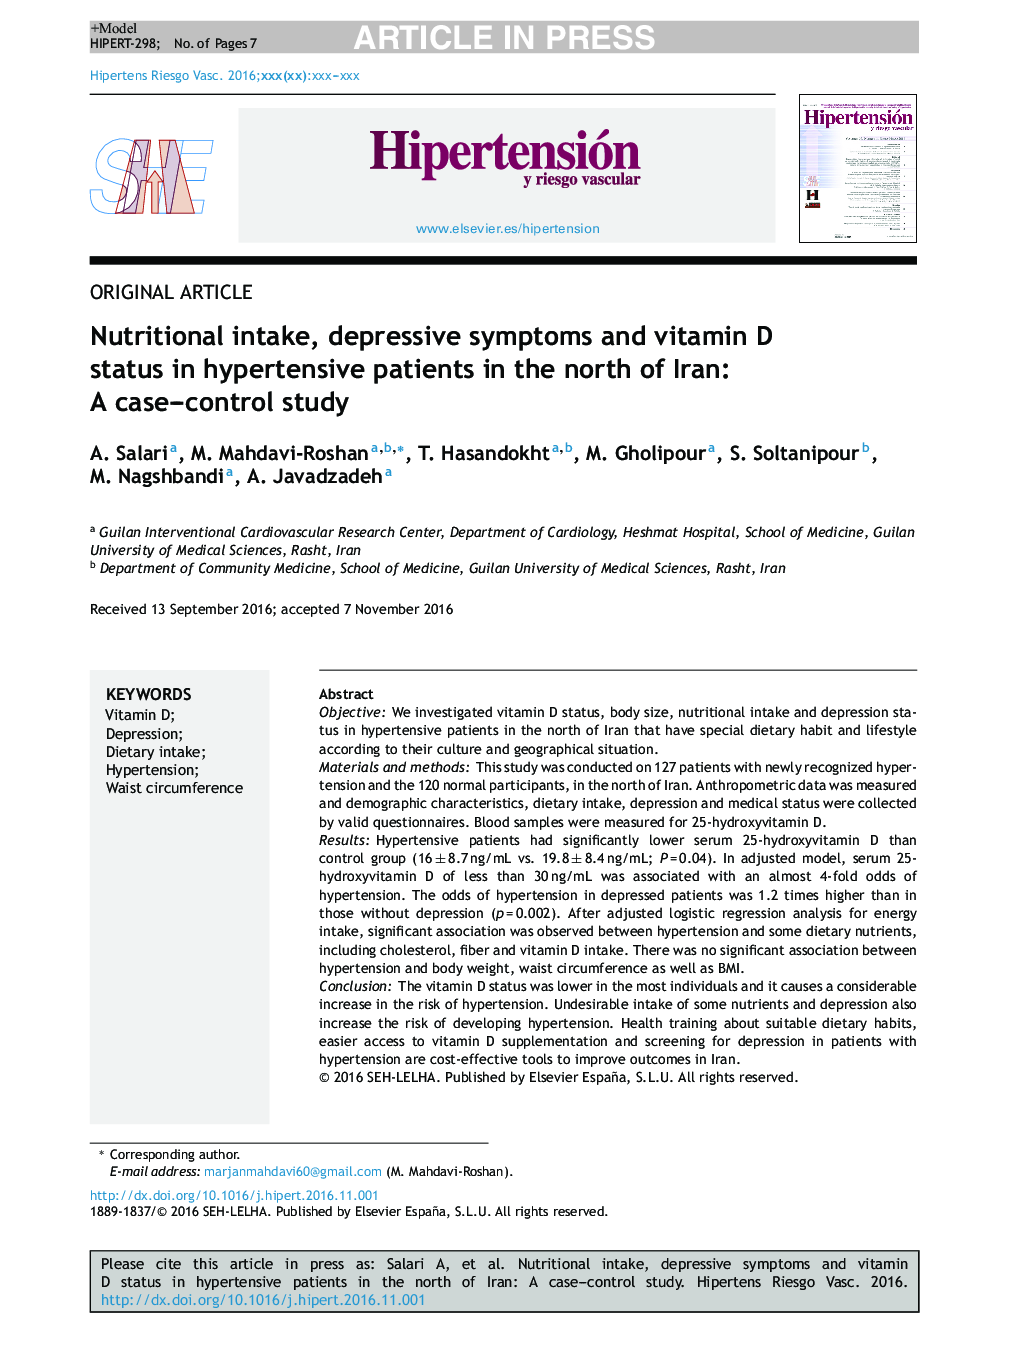 Nutritional intake, depressive symptoms and vitamin D status in hypertensive patients in the north of Iran: A case-control study